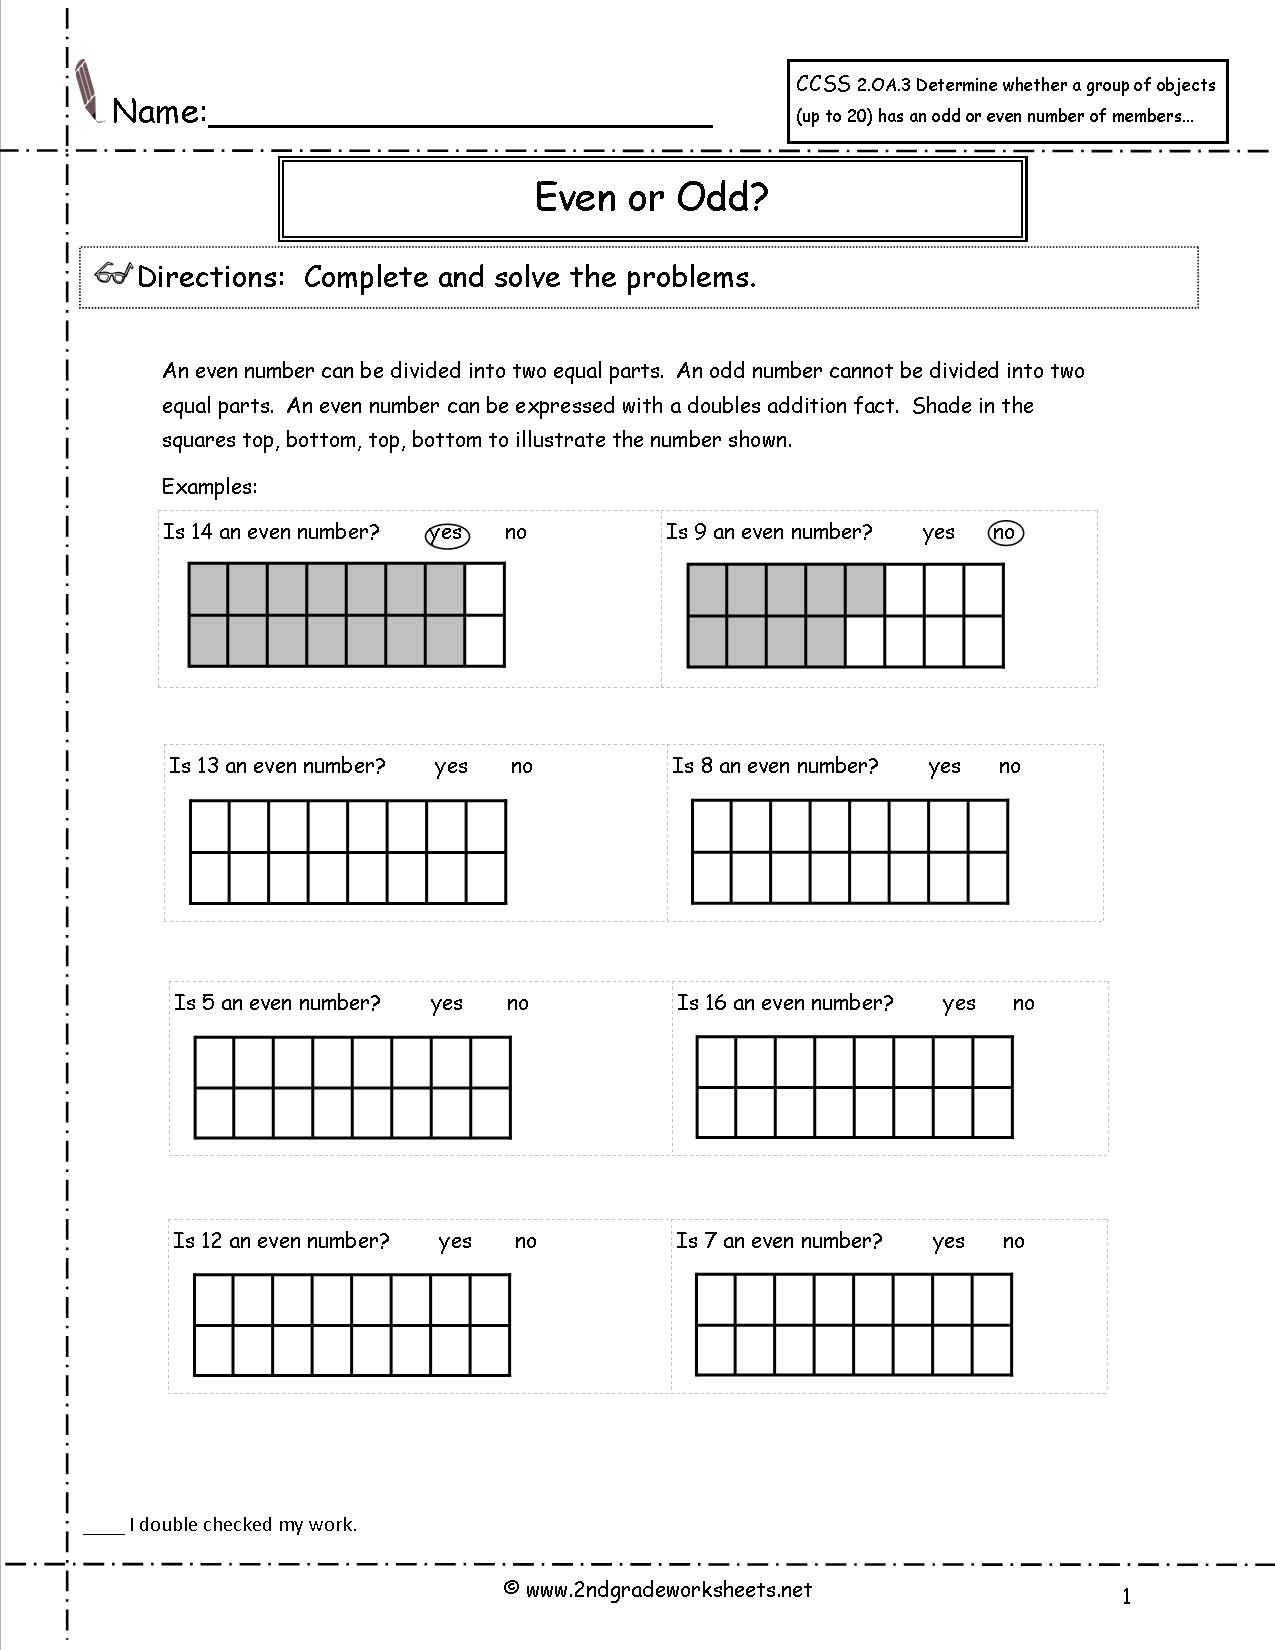 Common Core 2nd Grade Math Worksheets Multiplication Image